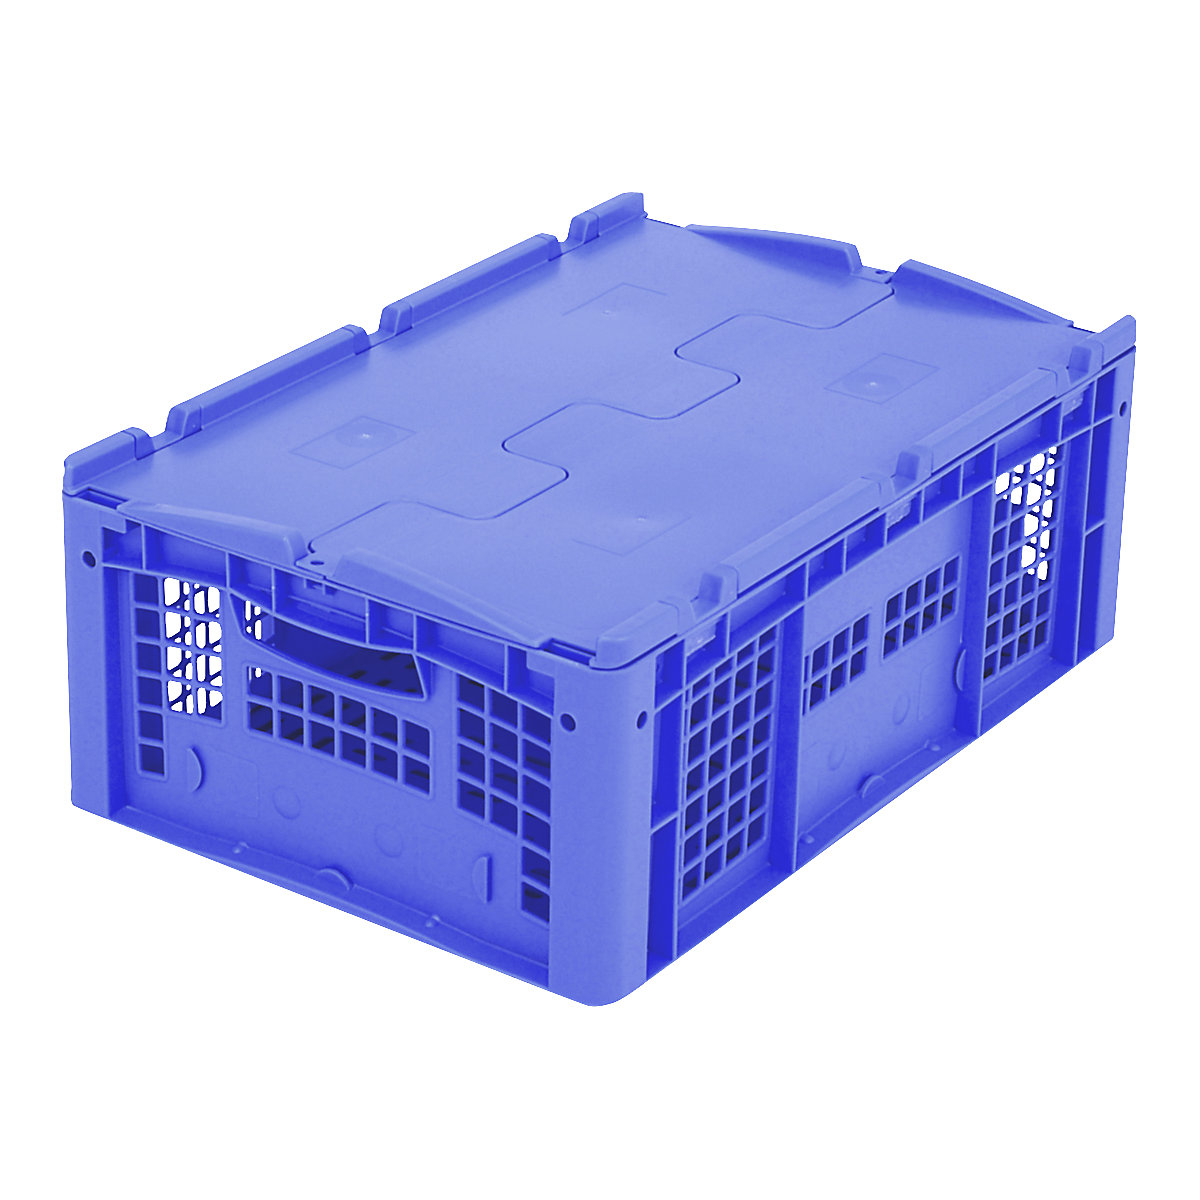 XL Euro stacking container – BITO, with lid, perforated, LxWxH 600 x 400 x 238 mm-4